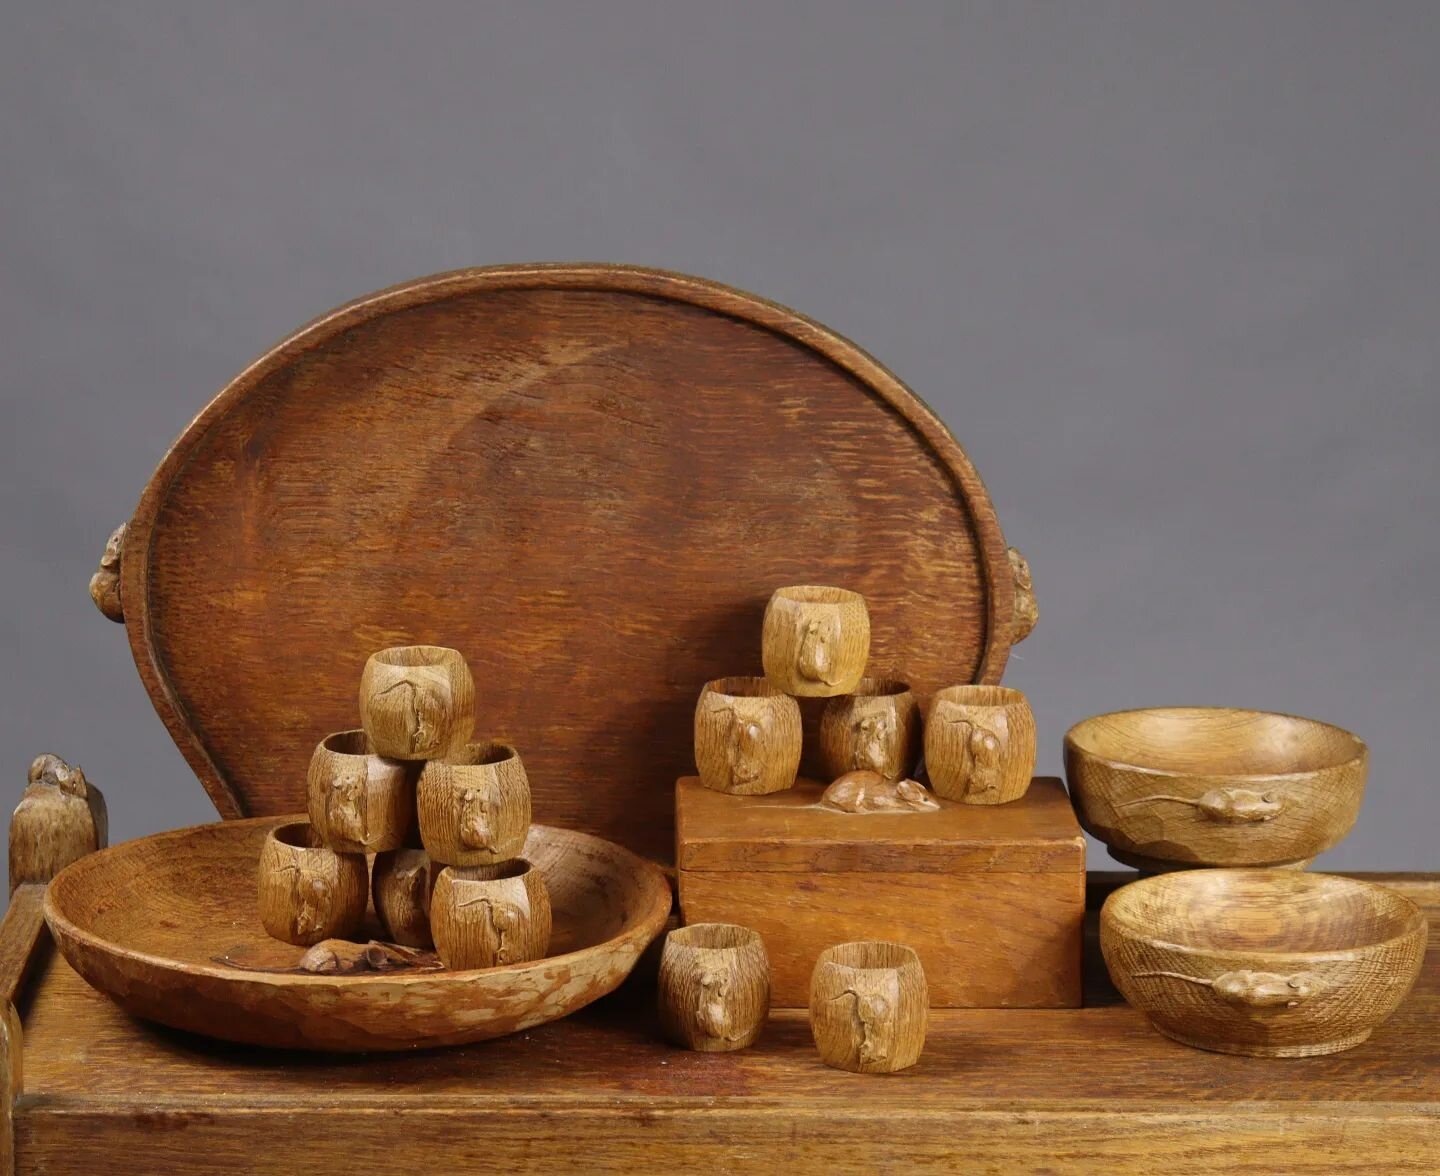 .
A collection of Robert 'Mouseman' Thompson items dating from the 1950s, scurrying their way into our May Fine Art &amp; Antiques Sale

Accepting entries until 18th May
🐁 🐁 🐁

.

.

.

.

.

.

.

.

#mouseman #robertthompson #robertmousemanthomp